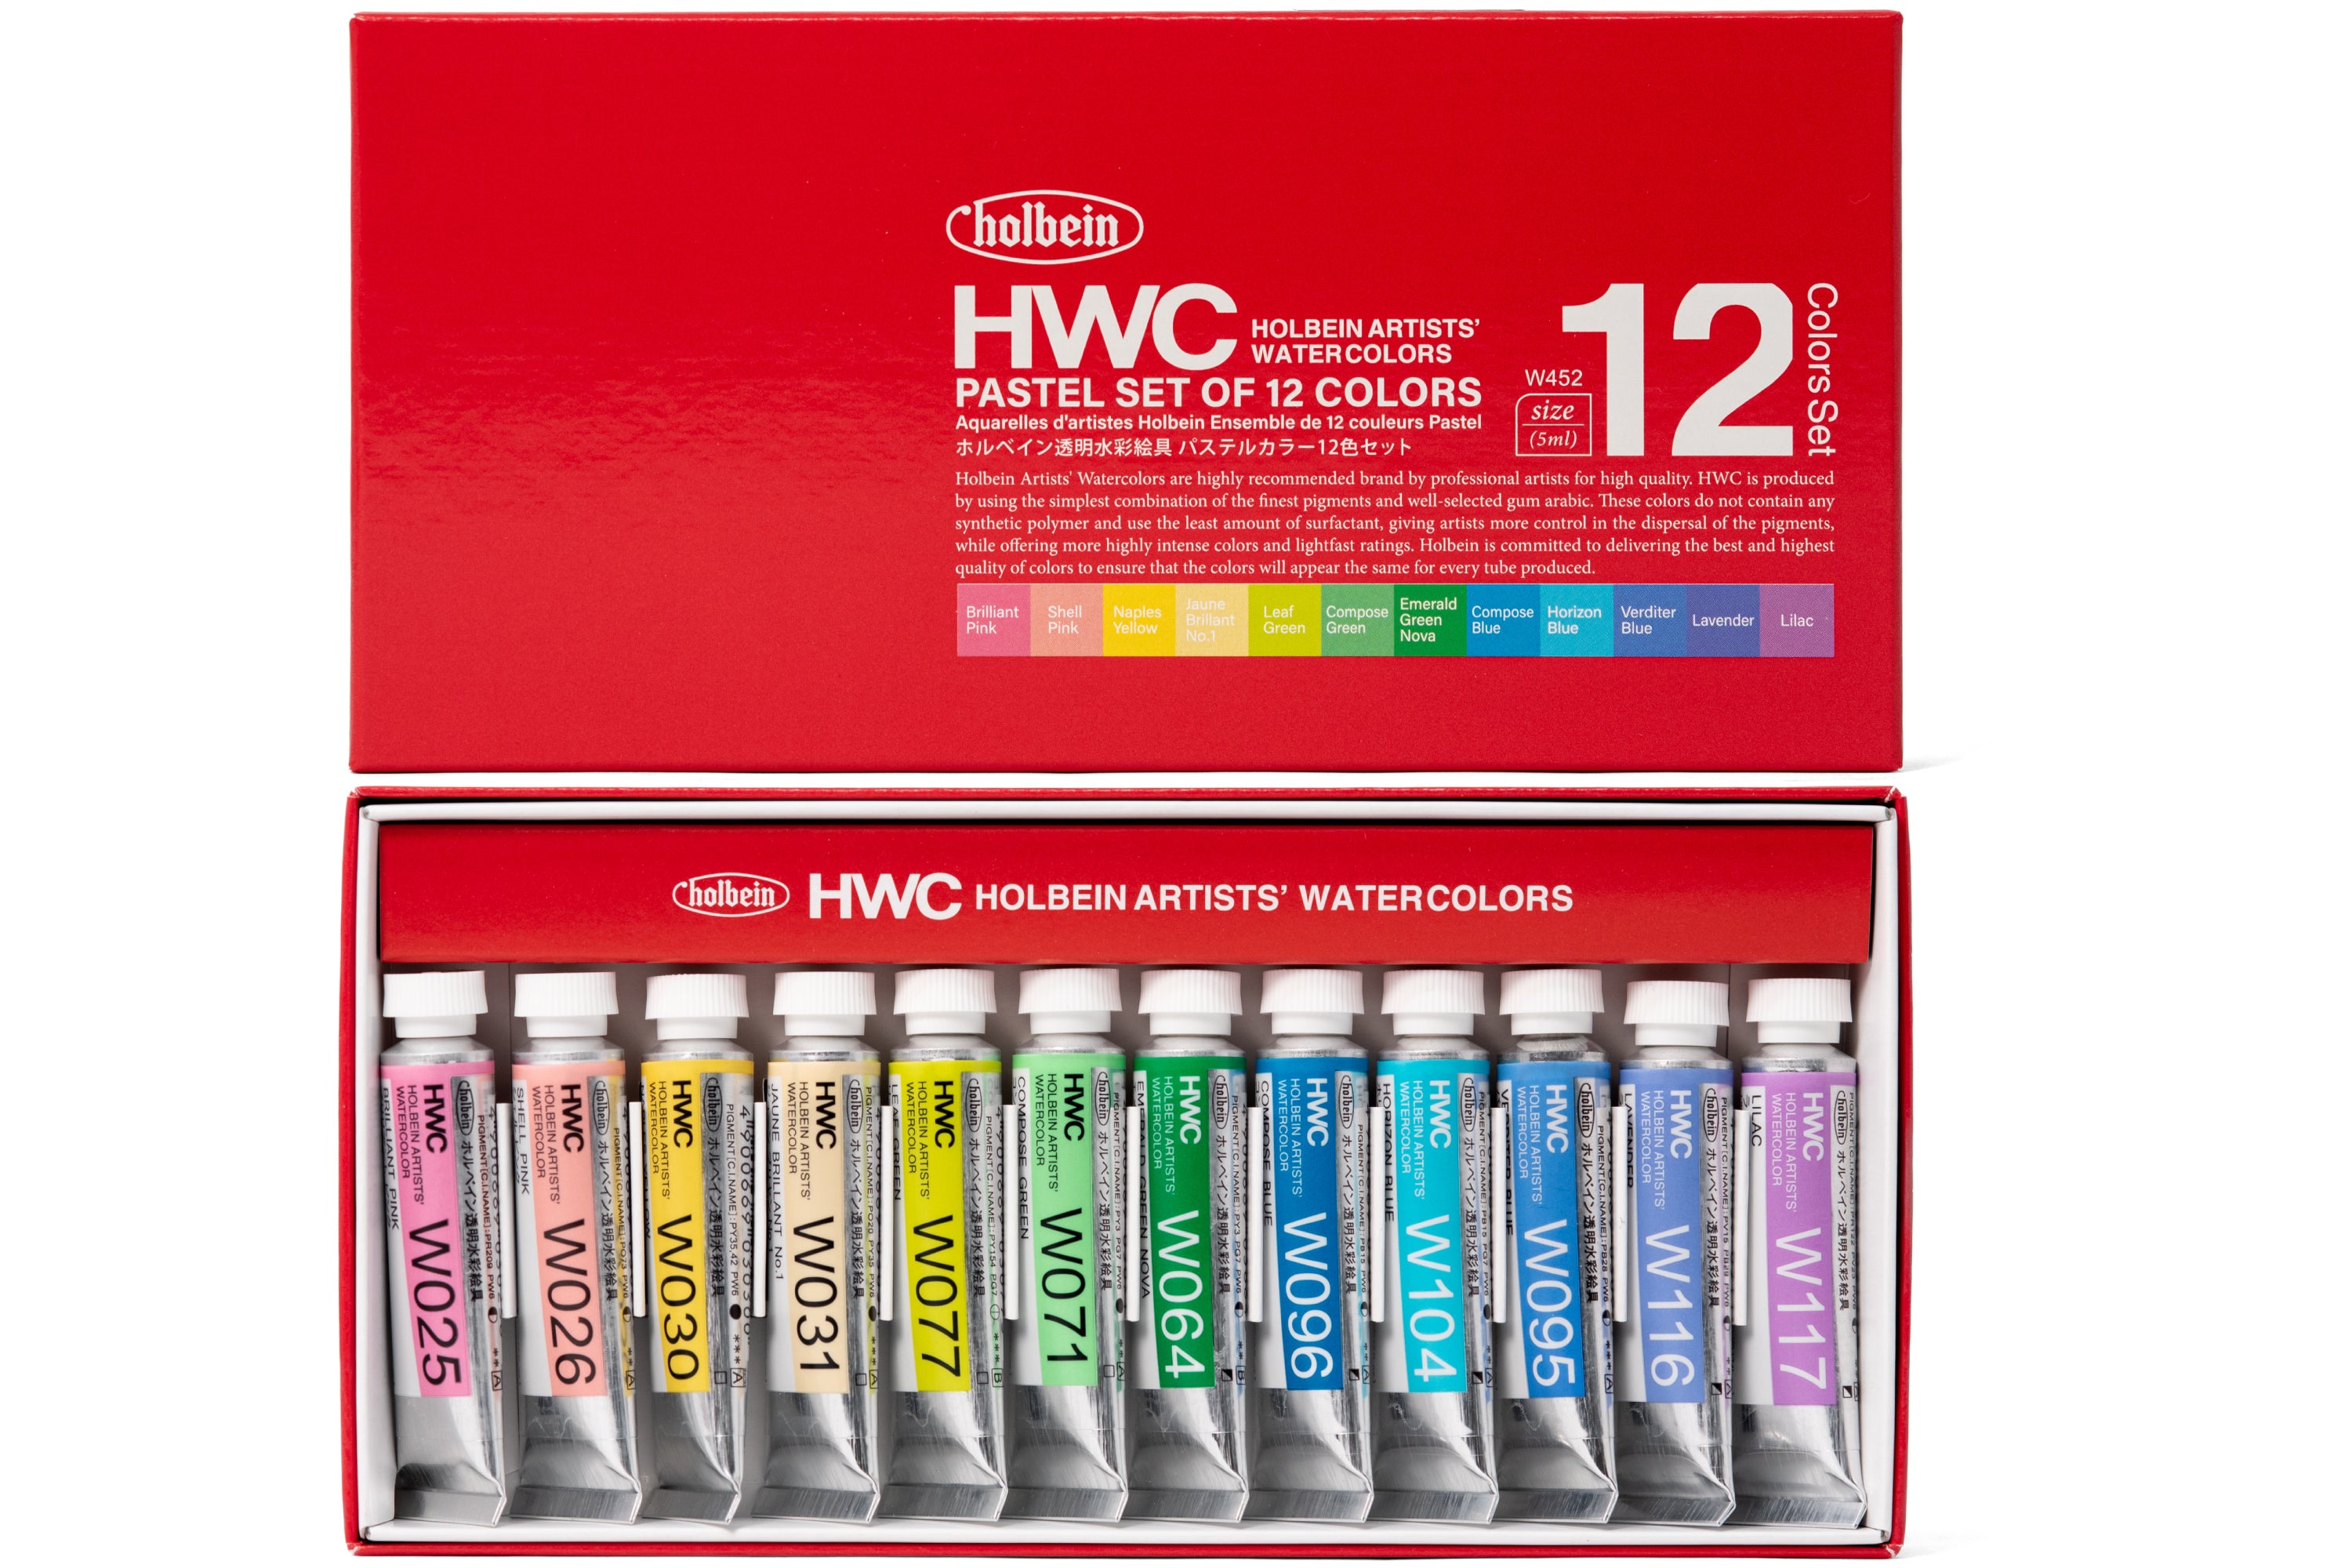 Holbein Co-branded Watercolor Paint 12 Colors 5ml Original Tube Set Il –  AOOKMIYA